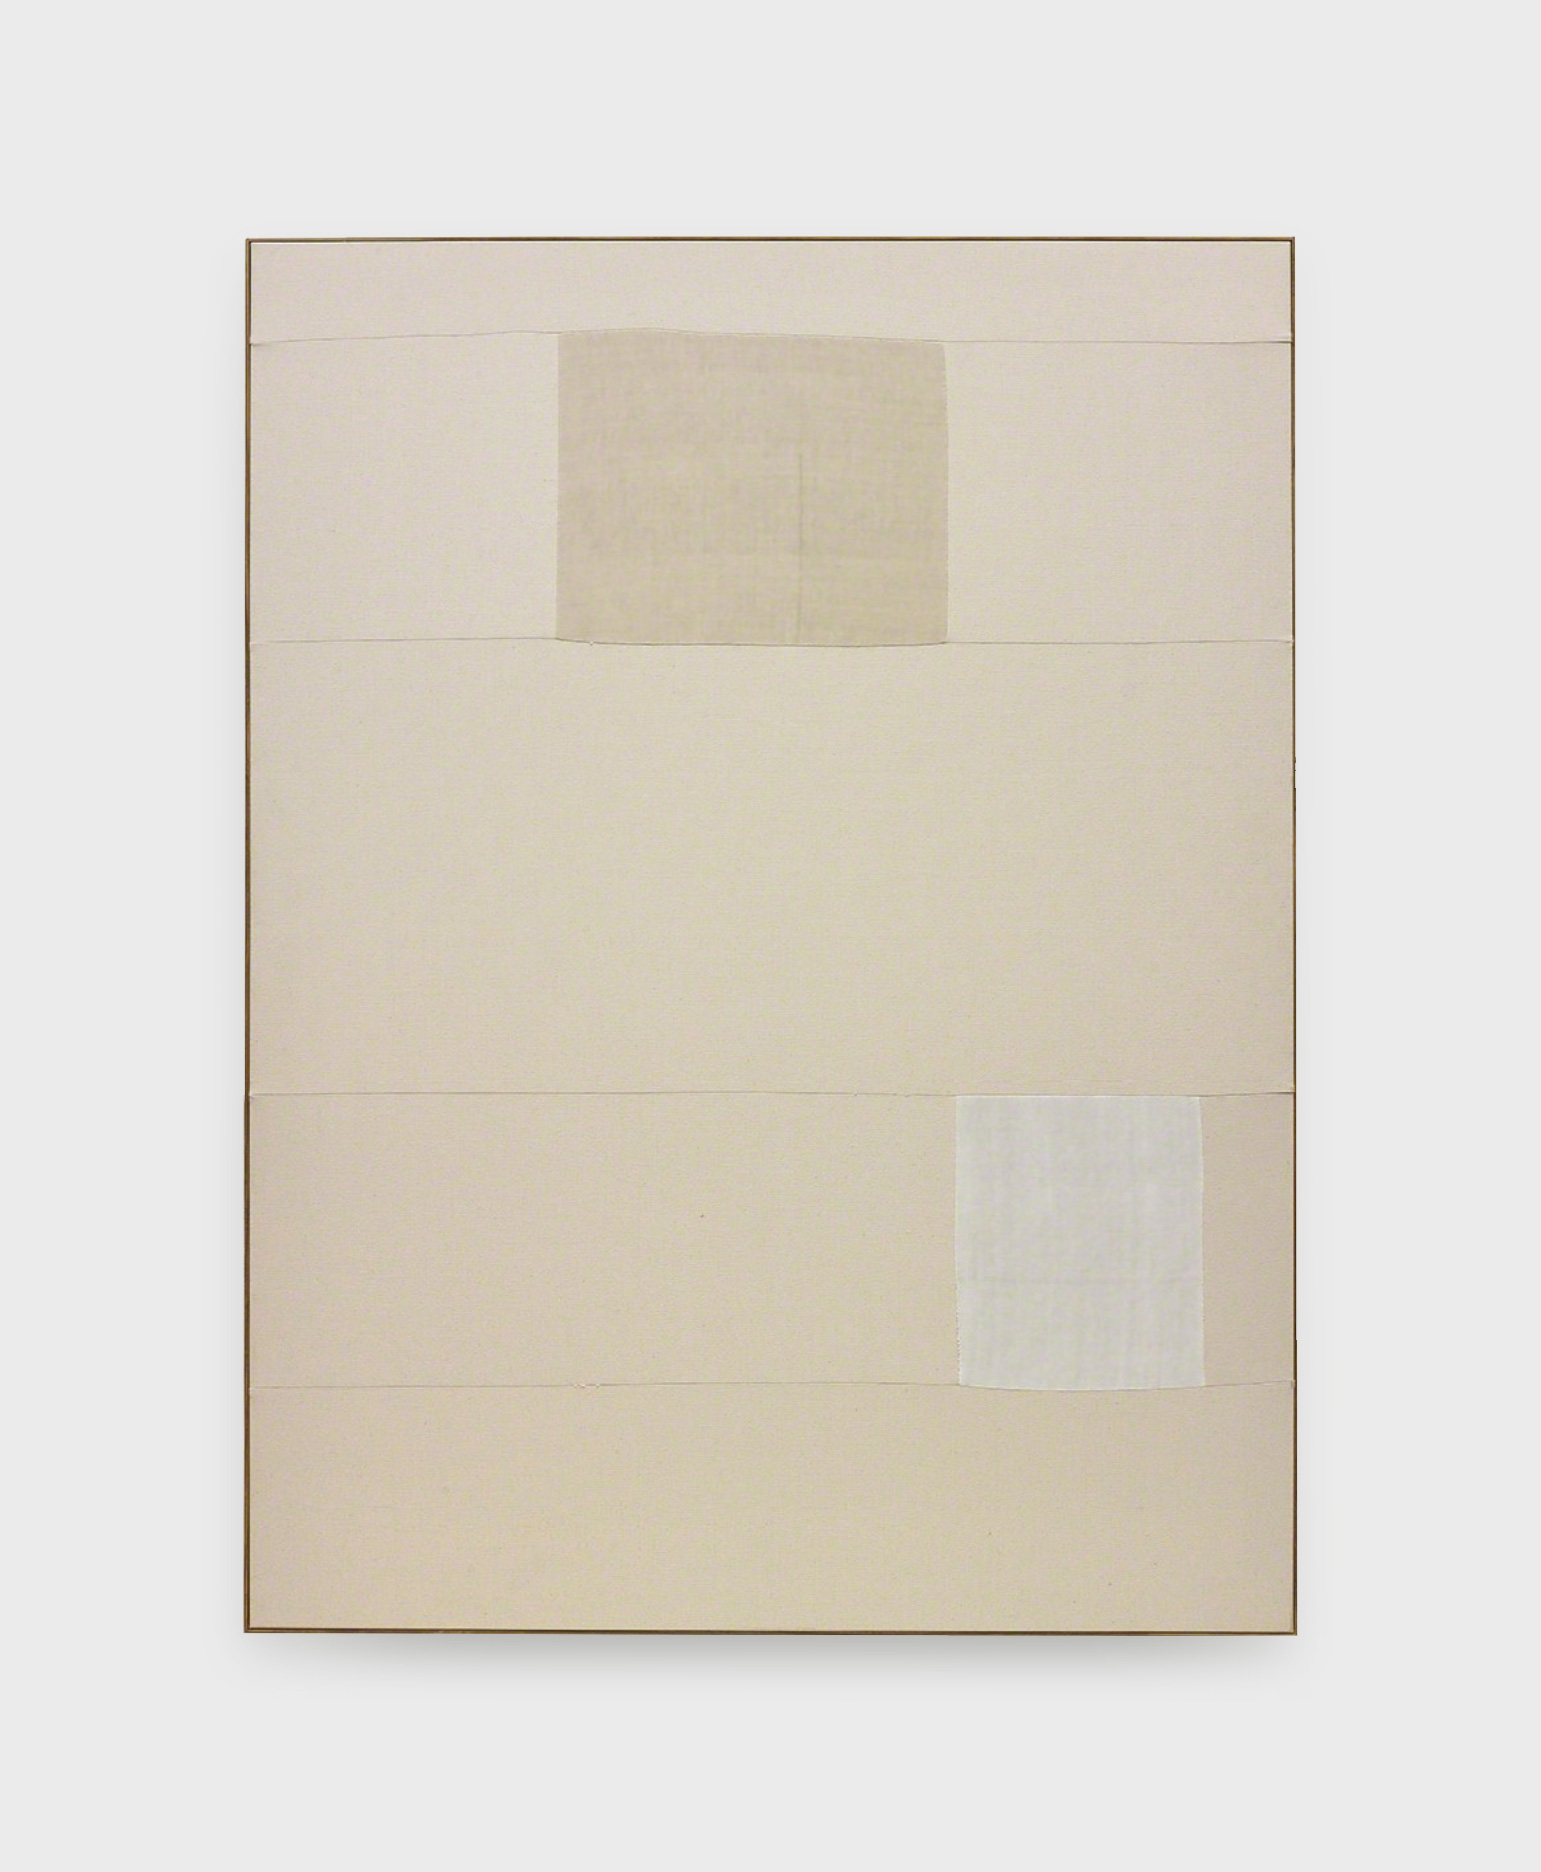 Ethan Cook, Untitled, 2013, Hand woven cotton canvas and canvas, in artist's frame, 205 × 154 cm ©The Artist, Image Courtesy Philips